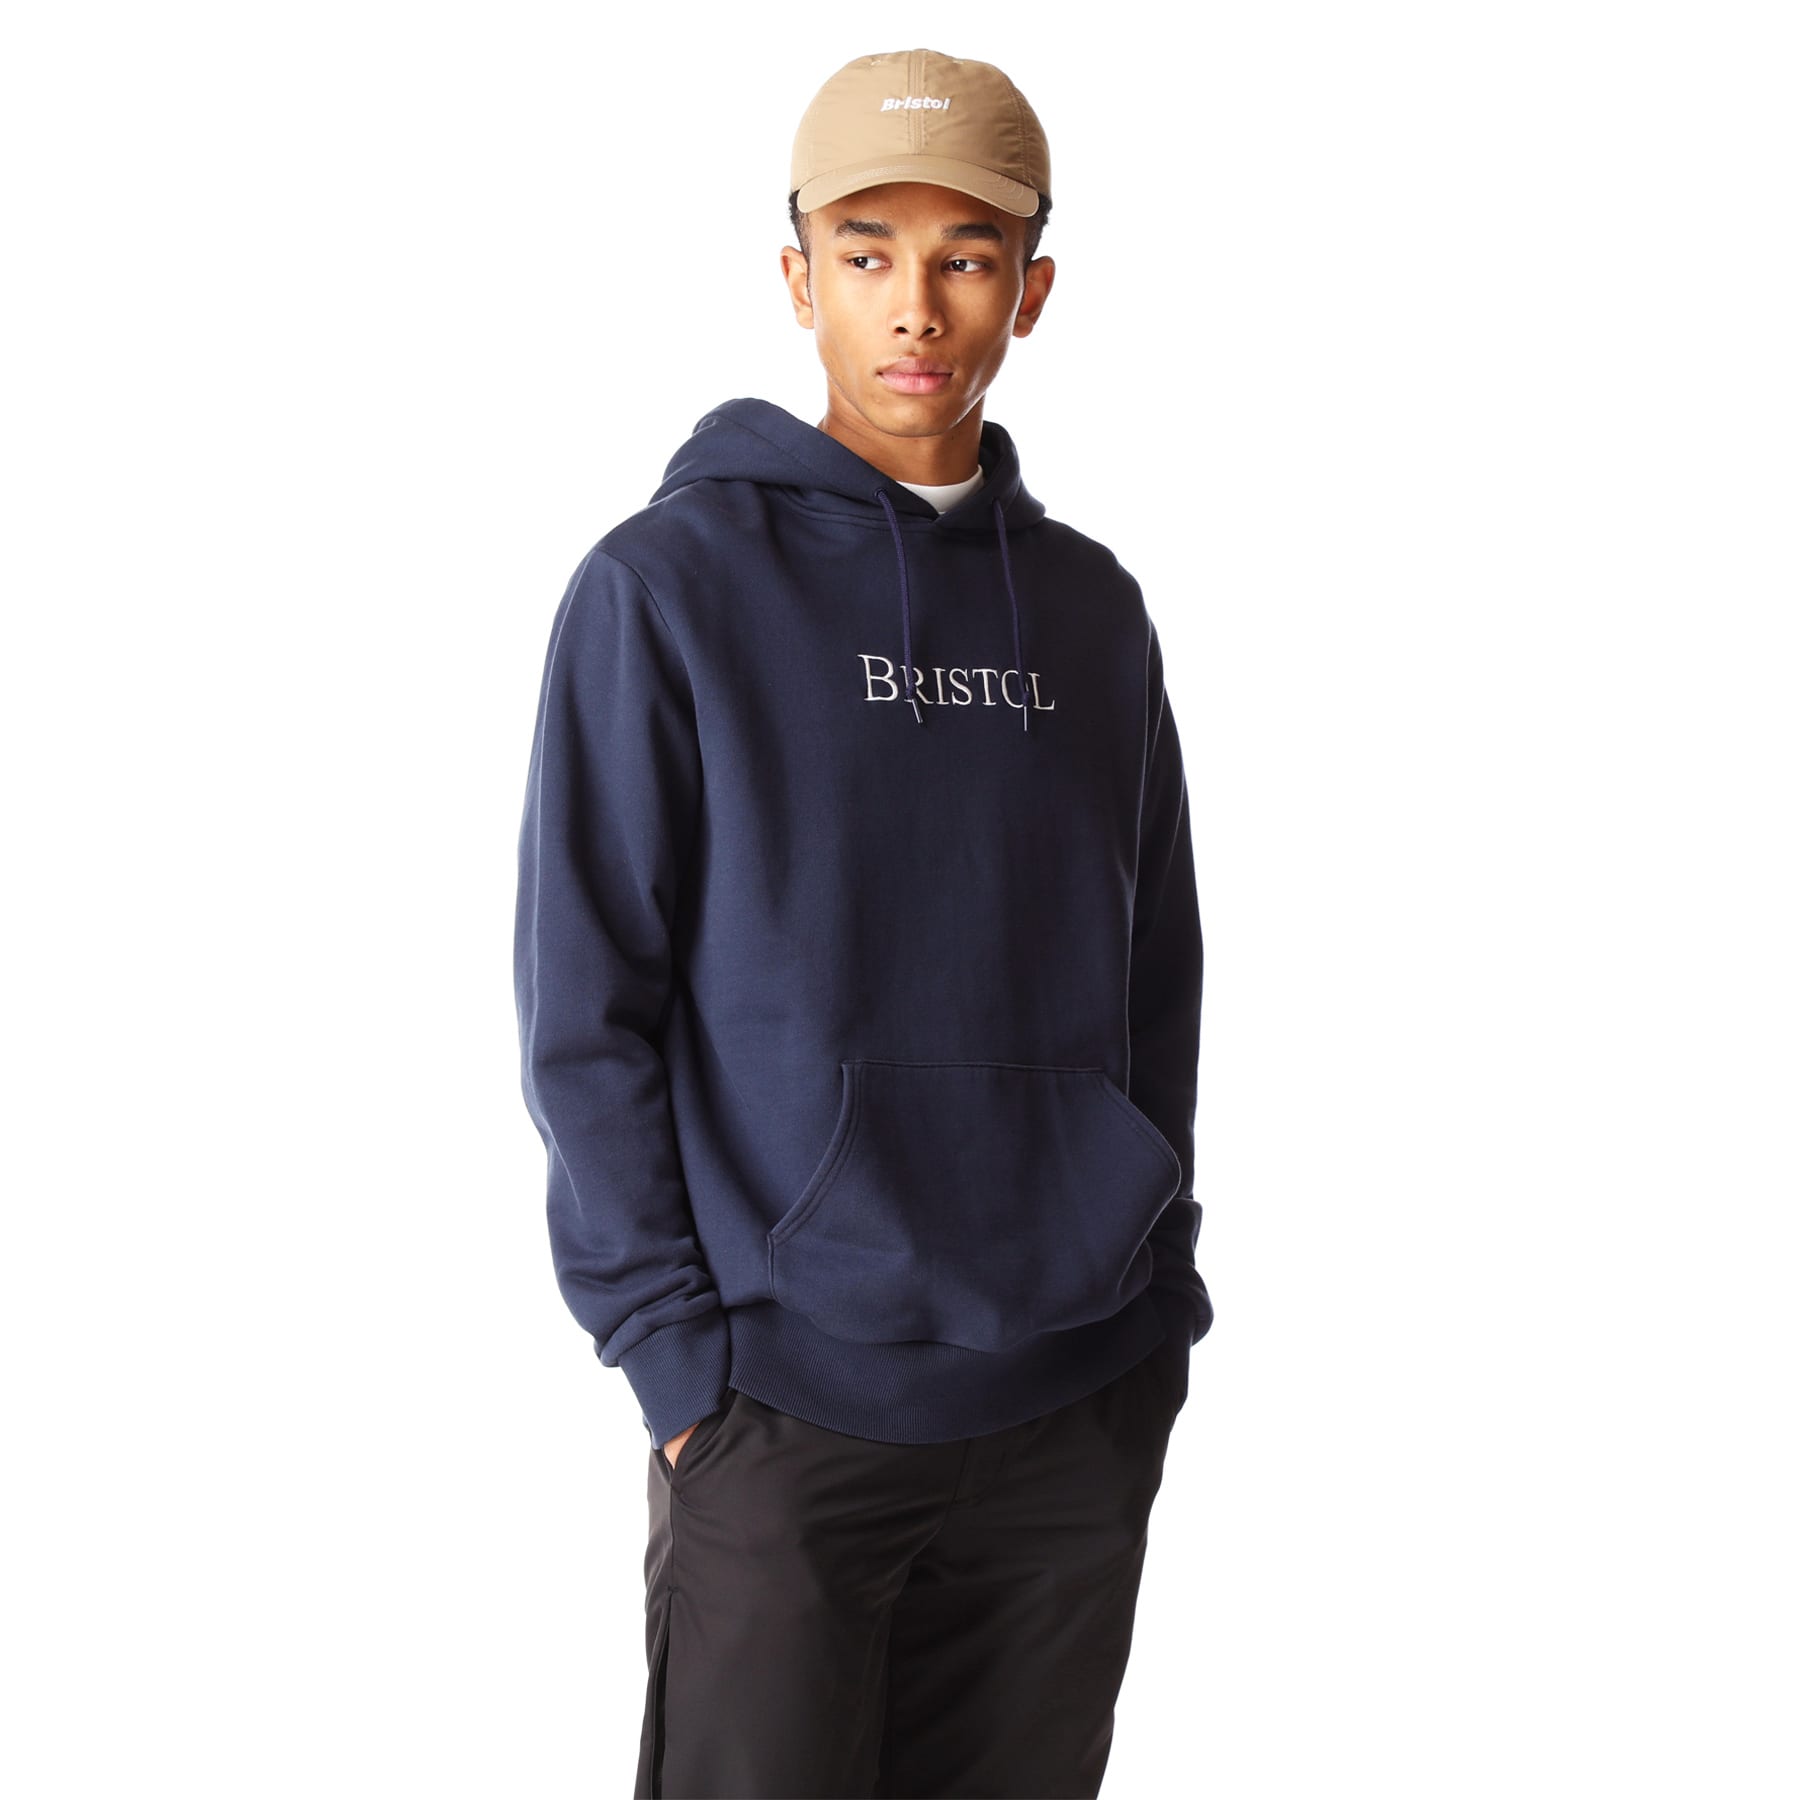 F.C.Real Bristol EMBROIDERY HOODIE XL geocoach.co.jp